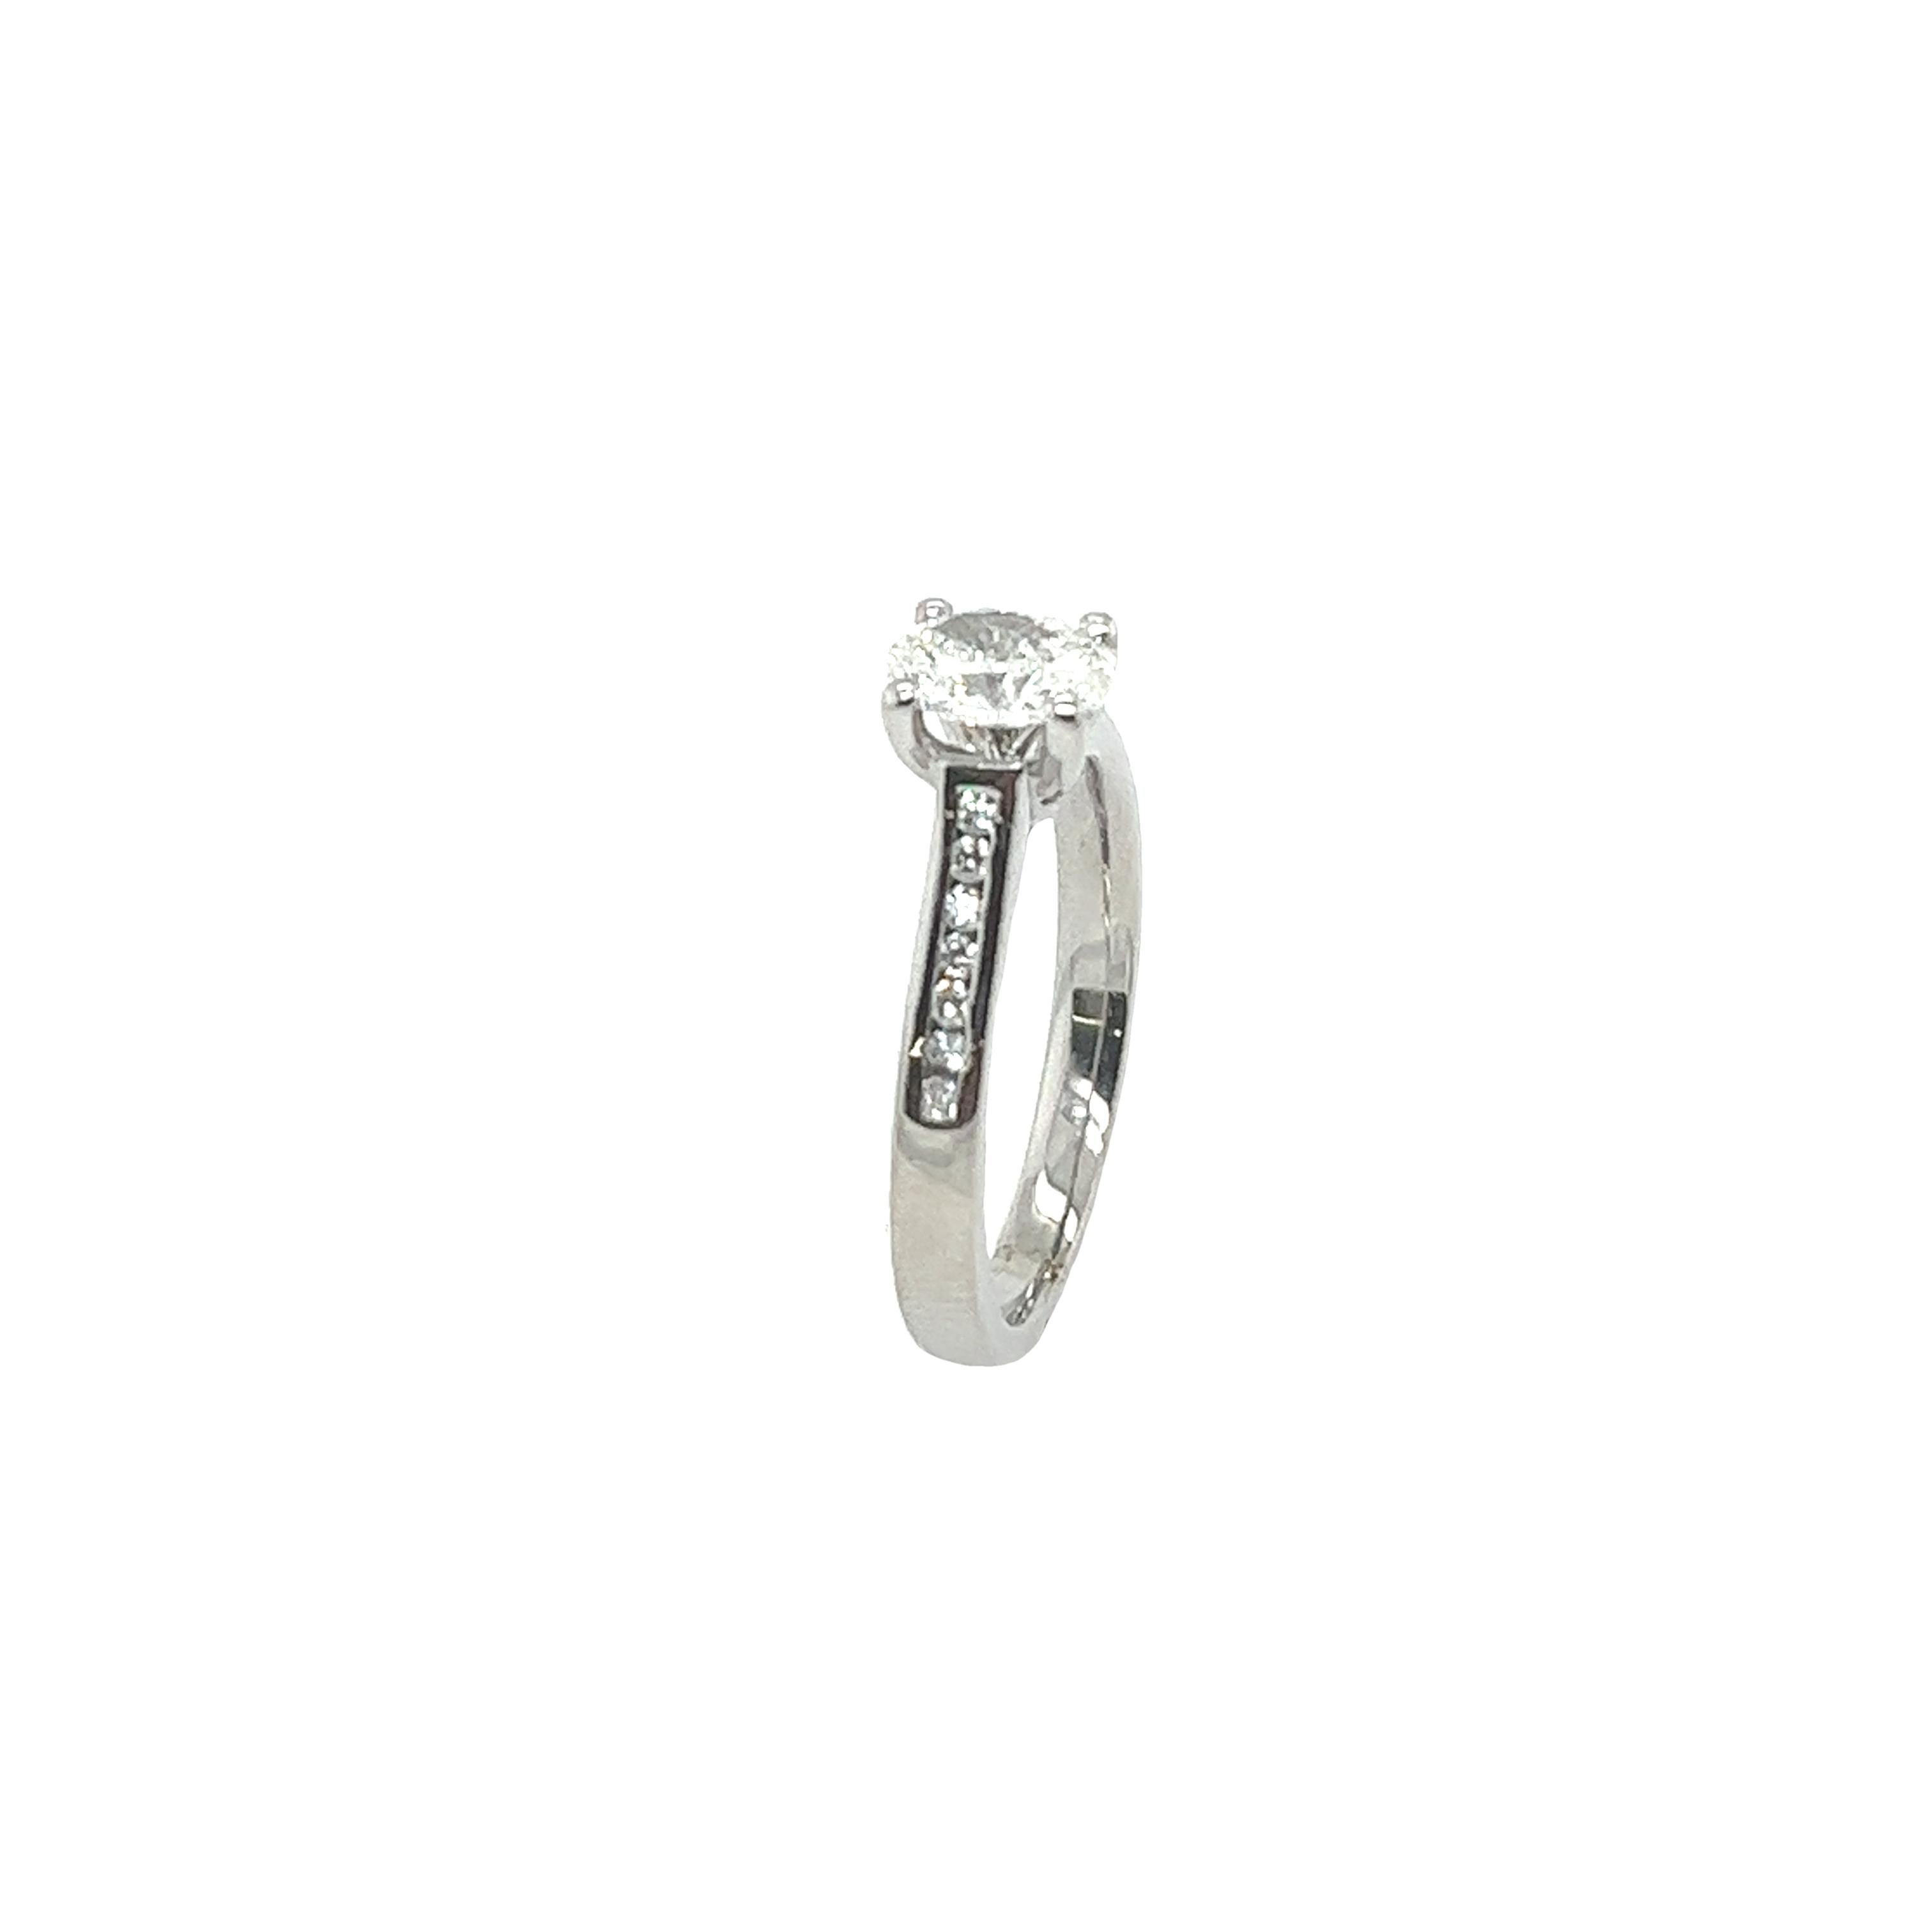 This gorgeous solitaire diamond ring set with 0.60ct G/VS1 oval brilliant cut diamond with small diamonds shoulders, 0.10ct set in 18ct white gold setting can make a perfect engagement ring 
for a bride or a birthday present for a girlfriend.

Total